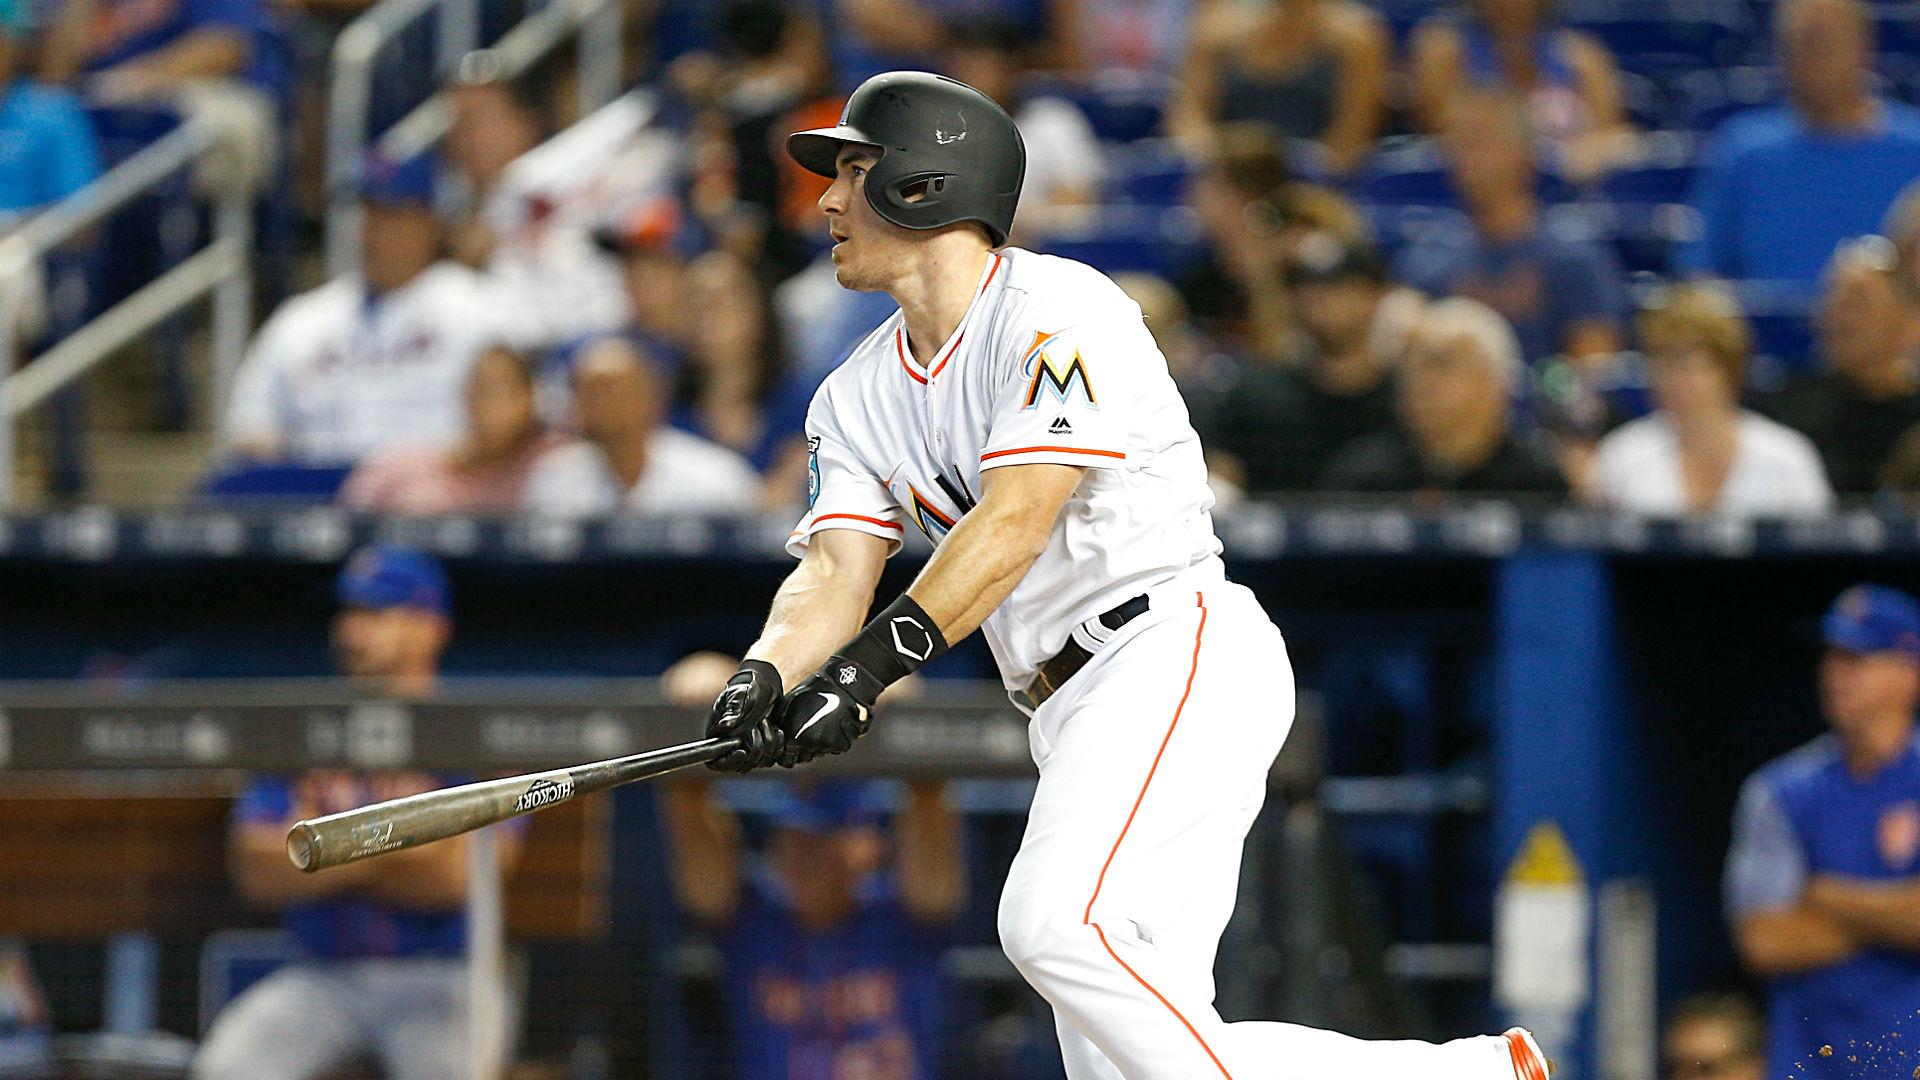 J.T. Realmuto trade rumors: The five best fits for the Marlins' star